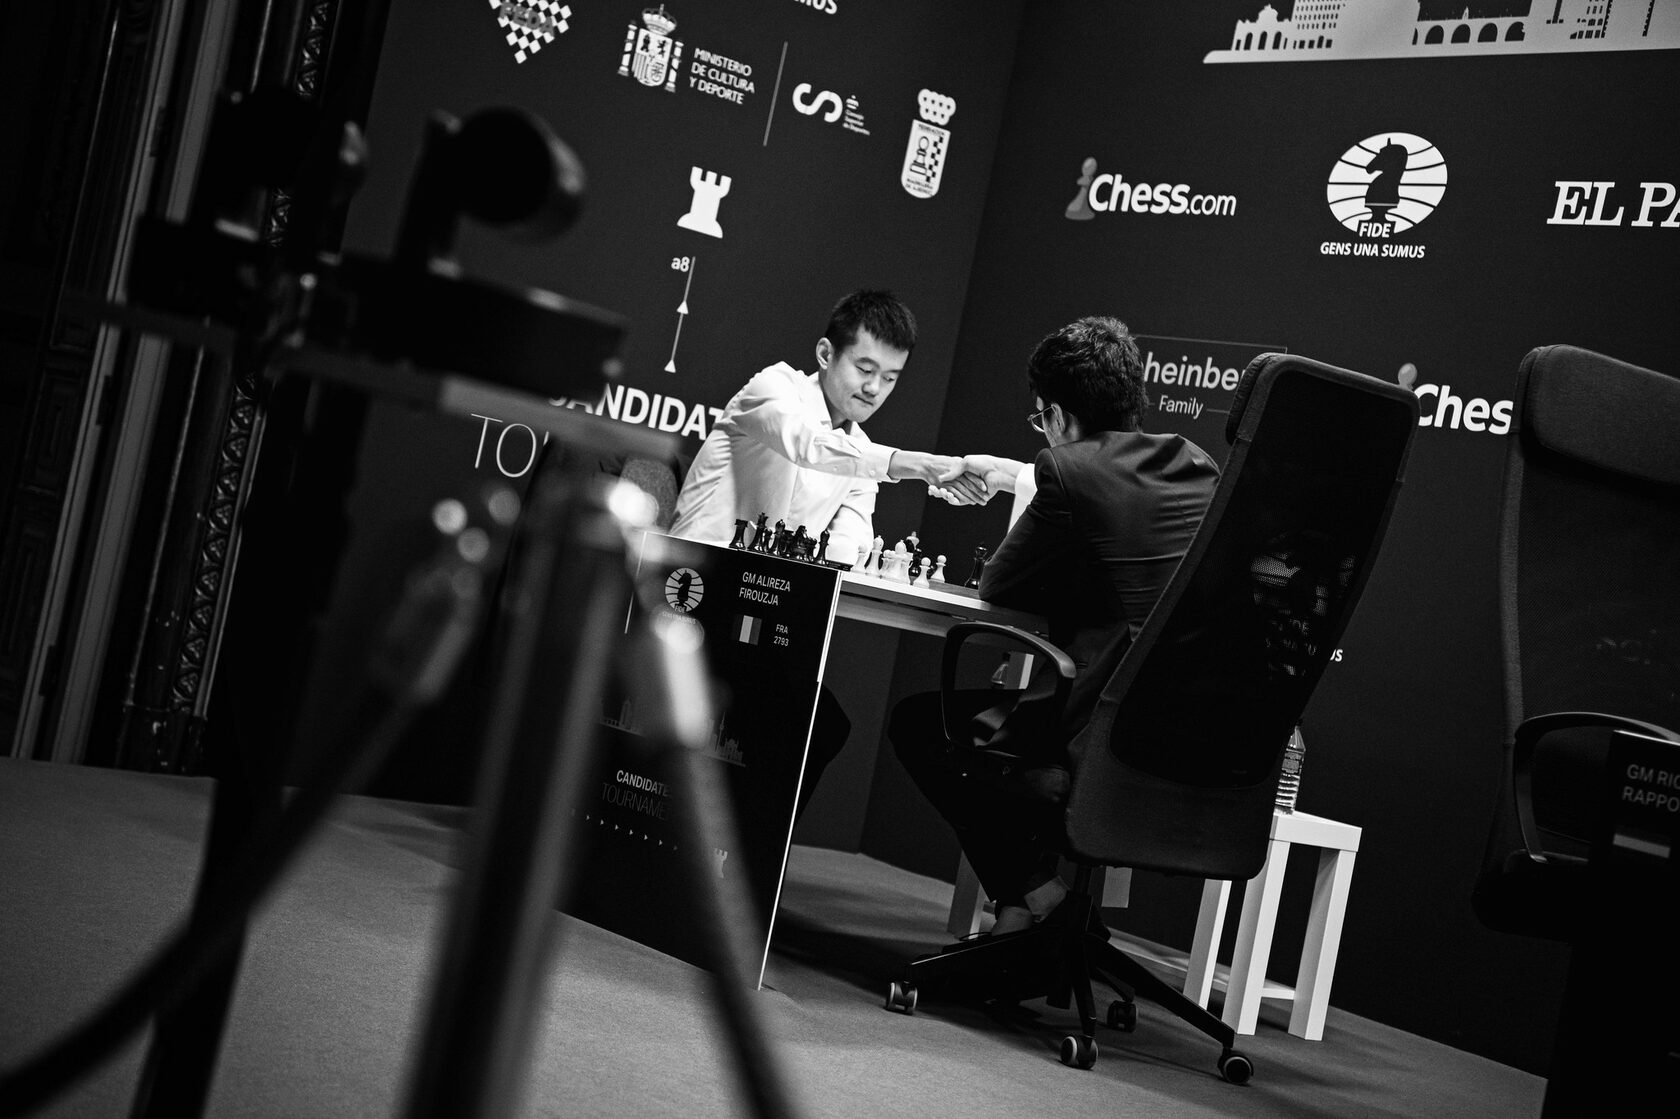 Round ten report: A major setback for Caruana while Nepomniachtchi pushes  forward - Milan Dinic